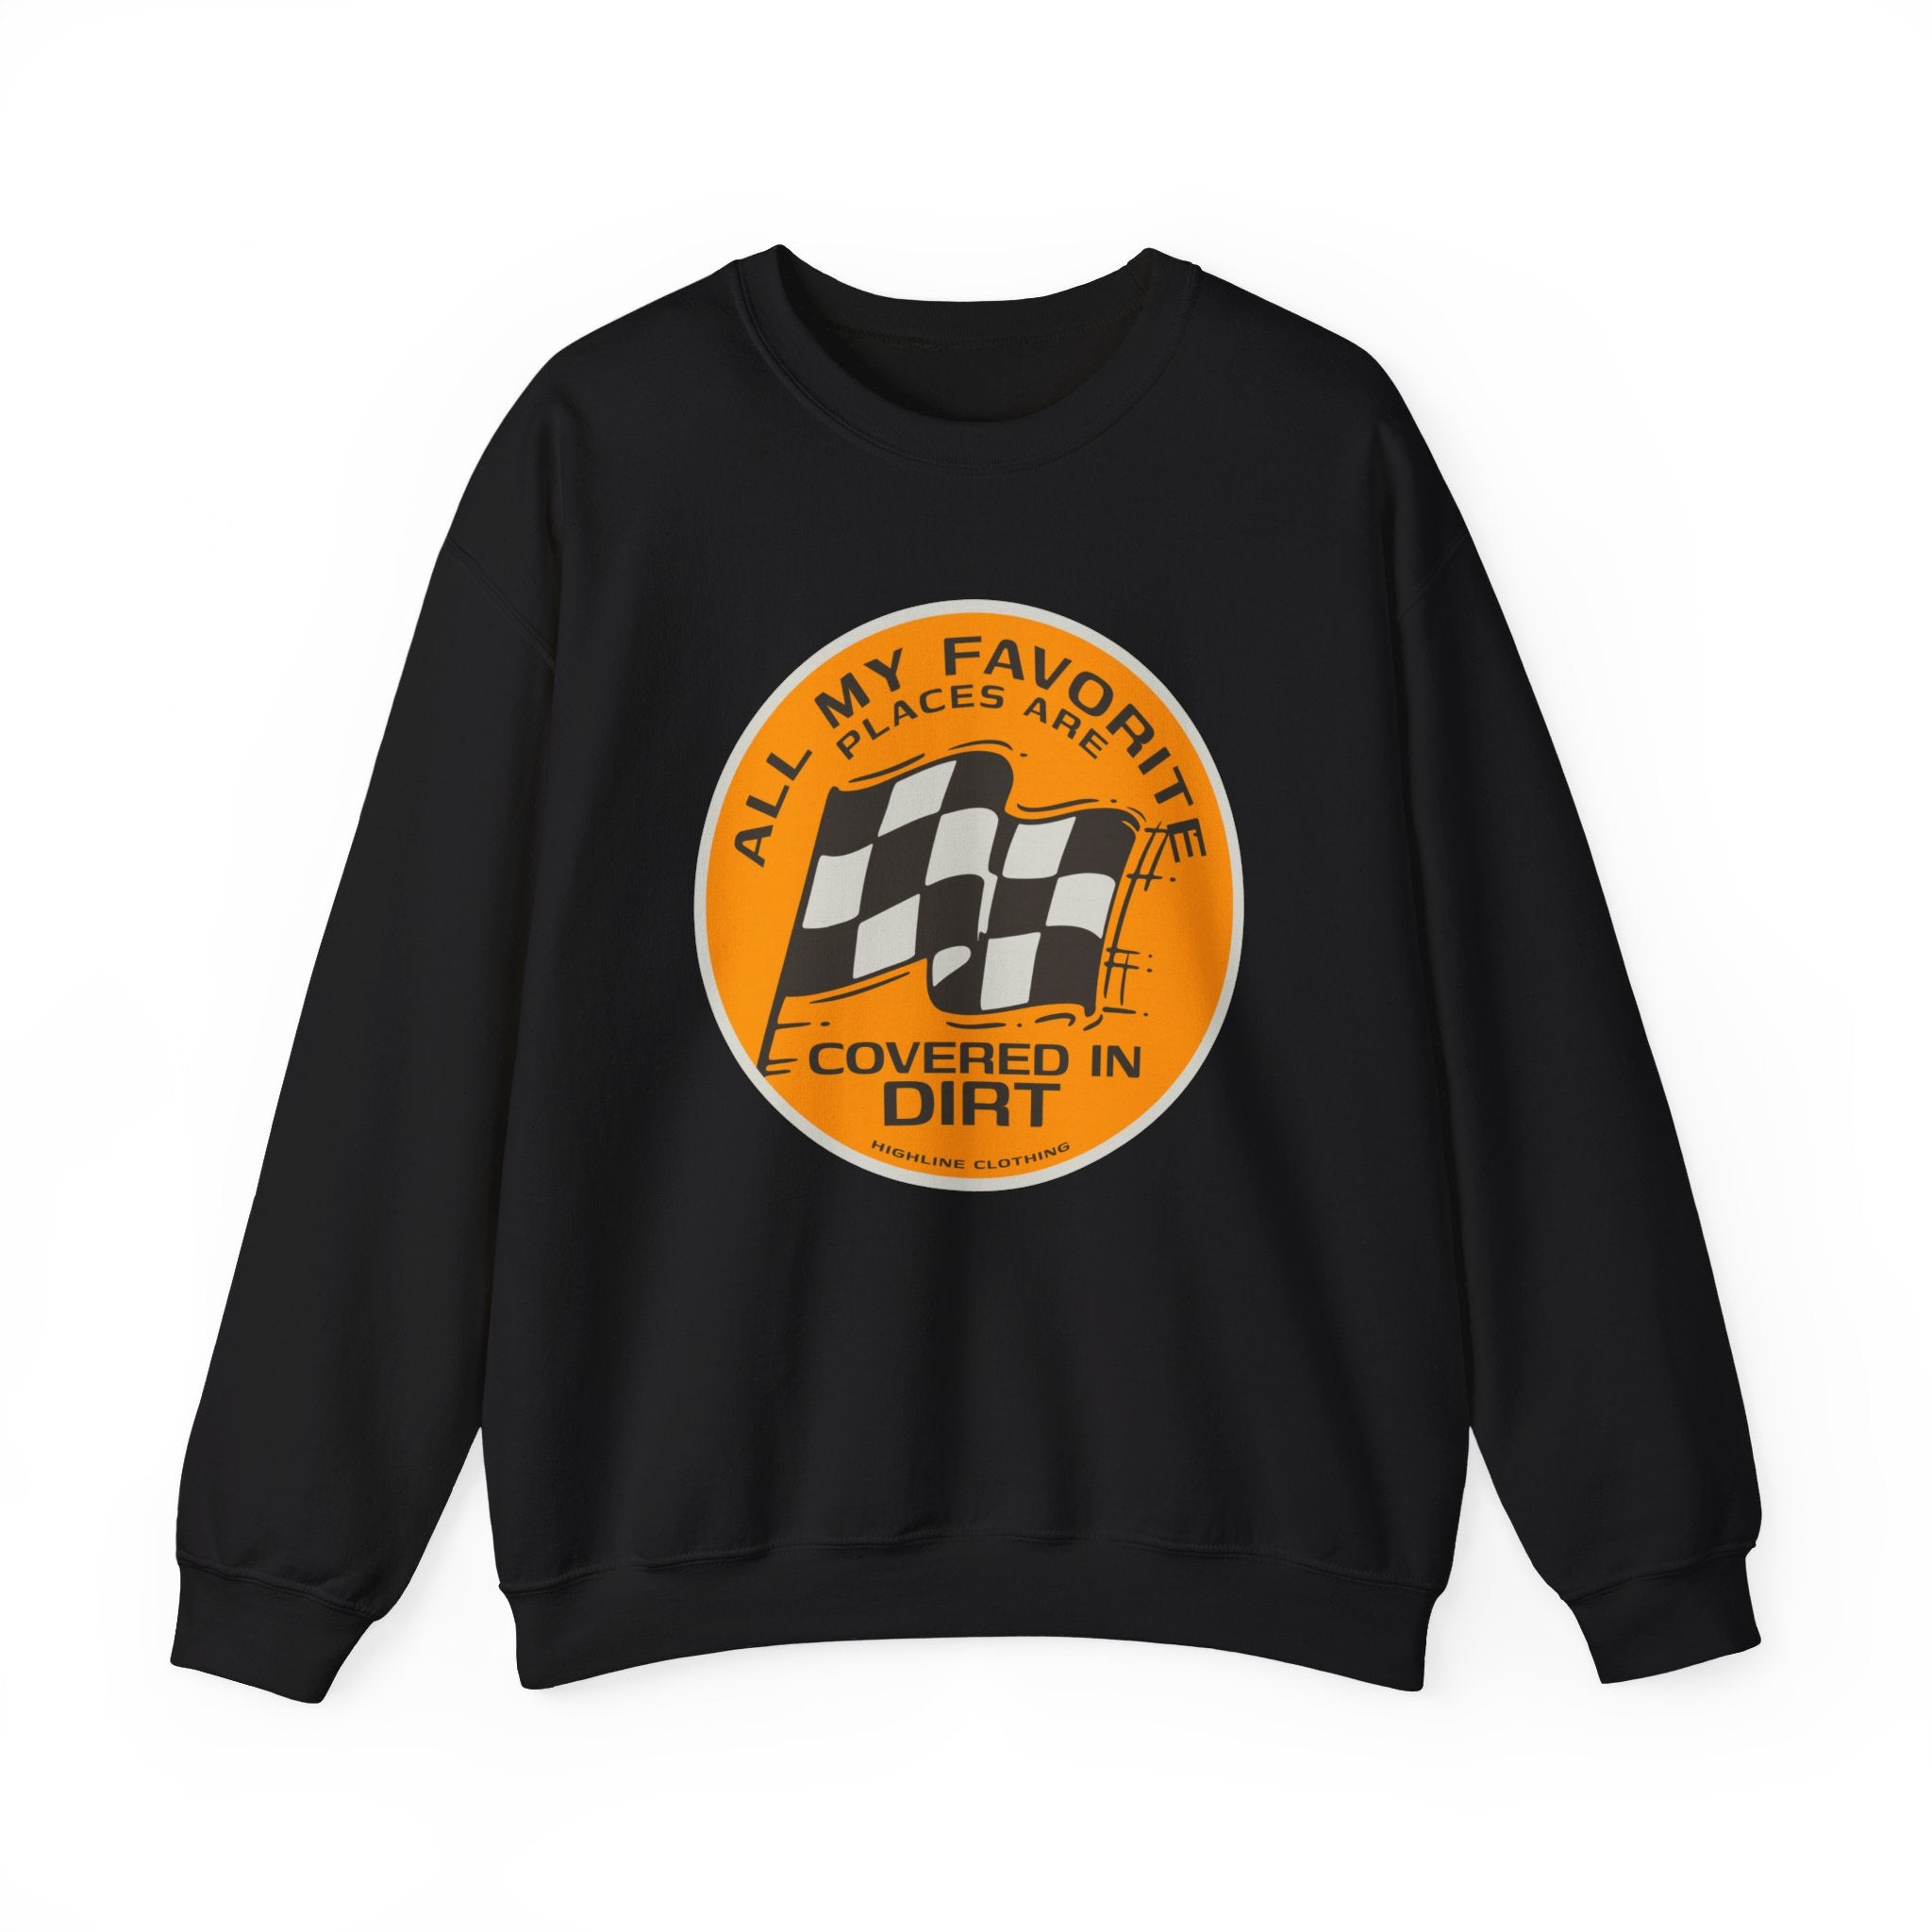 All My Favorite Places are Covered in Dirt Unisex Heavy Blend™ Crewneck Sweatshirt